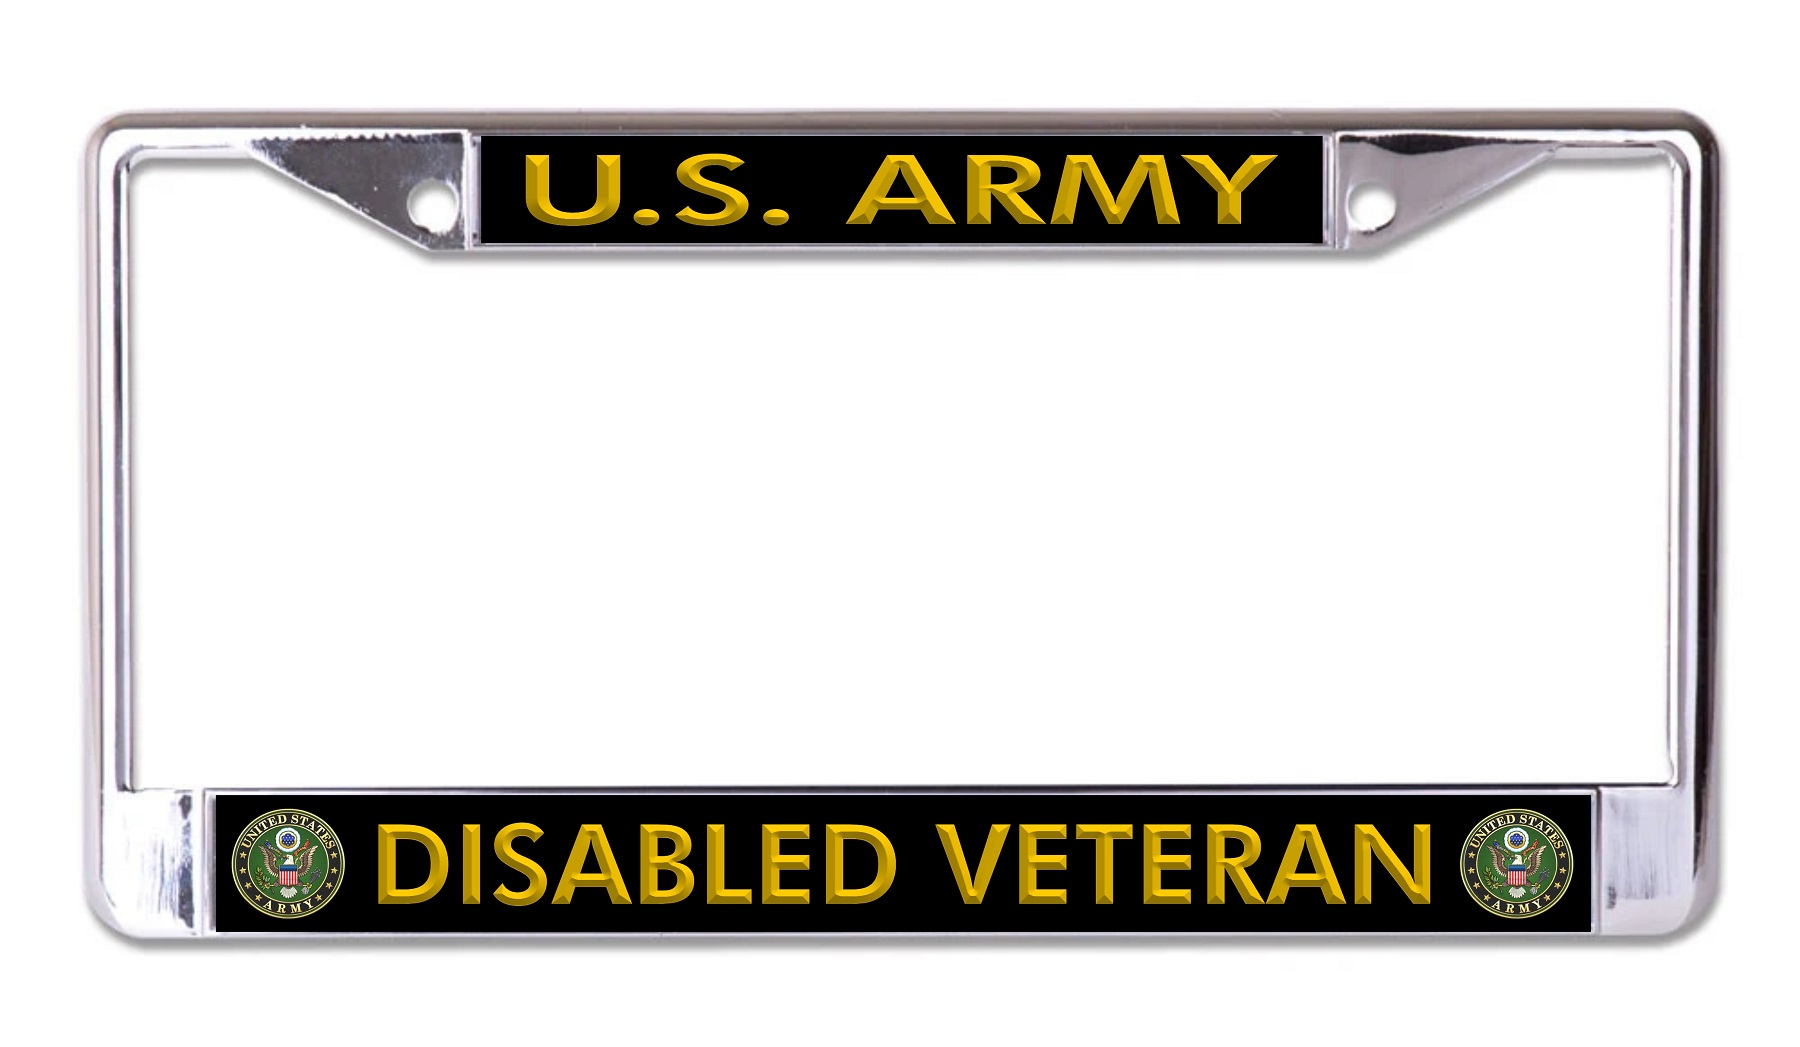 U.S. Army Disabled Veteran With Logo Chrome License Plate FRAME